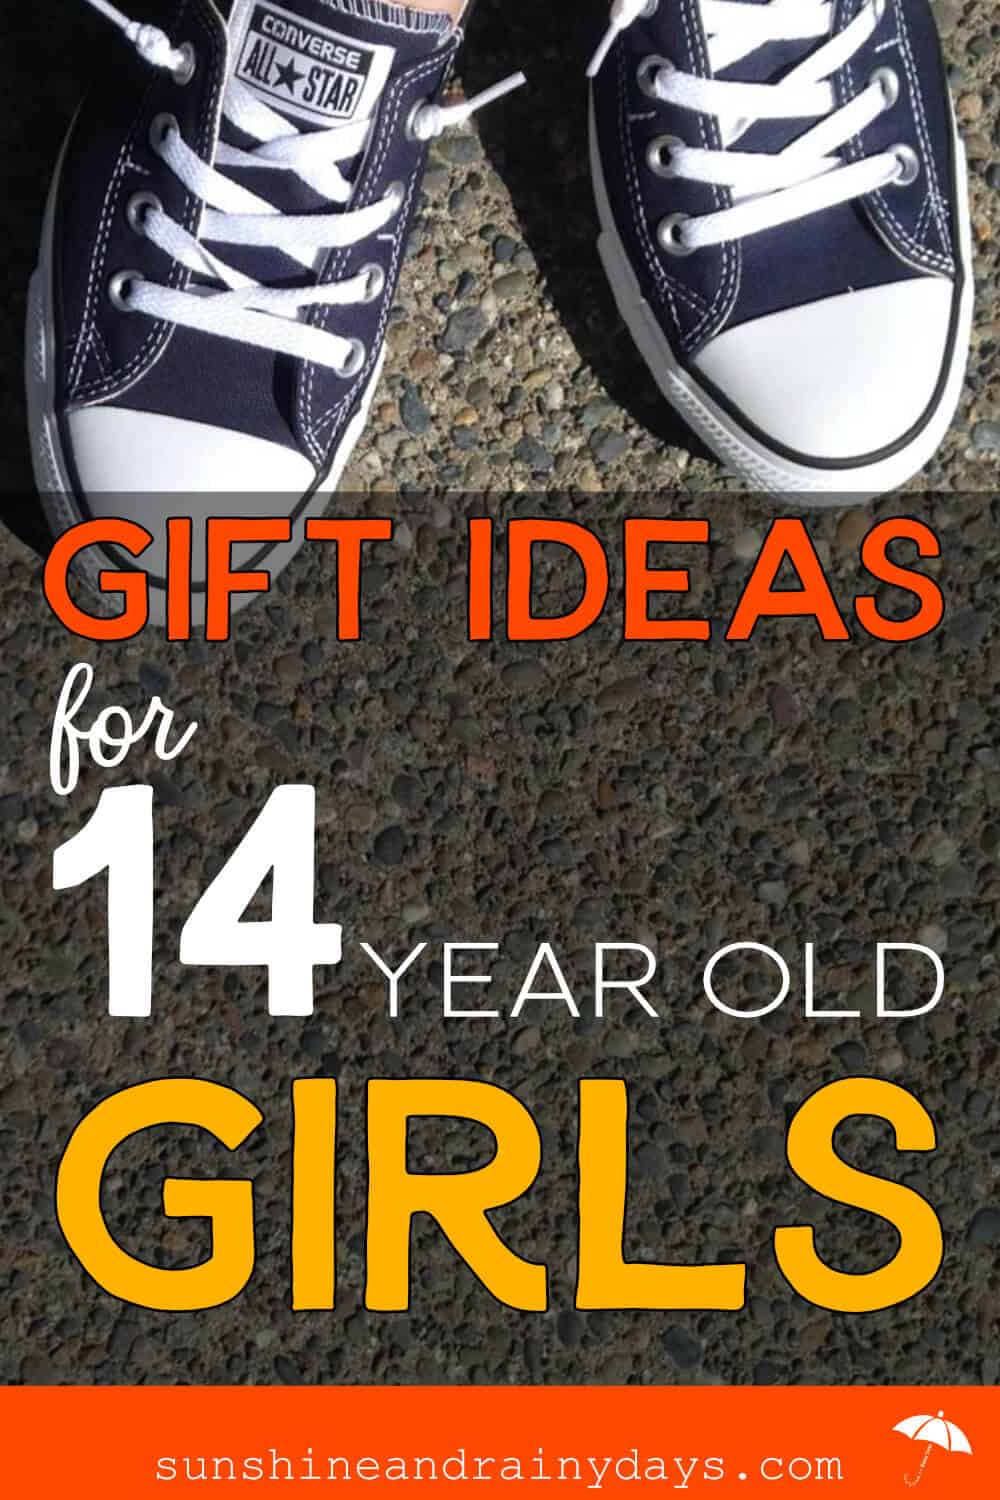 Gift Ideas For 14 Year Old Girls - Sunshine and Rainy Days